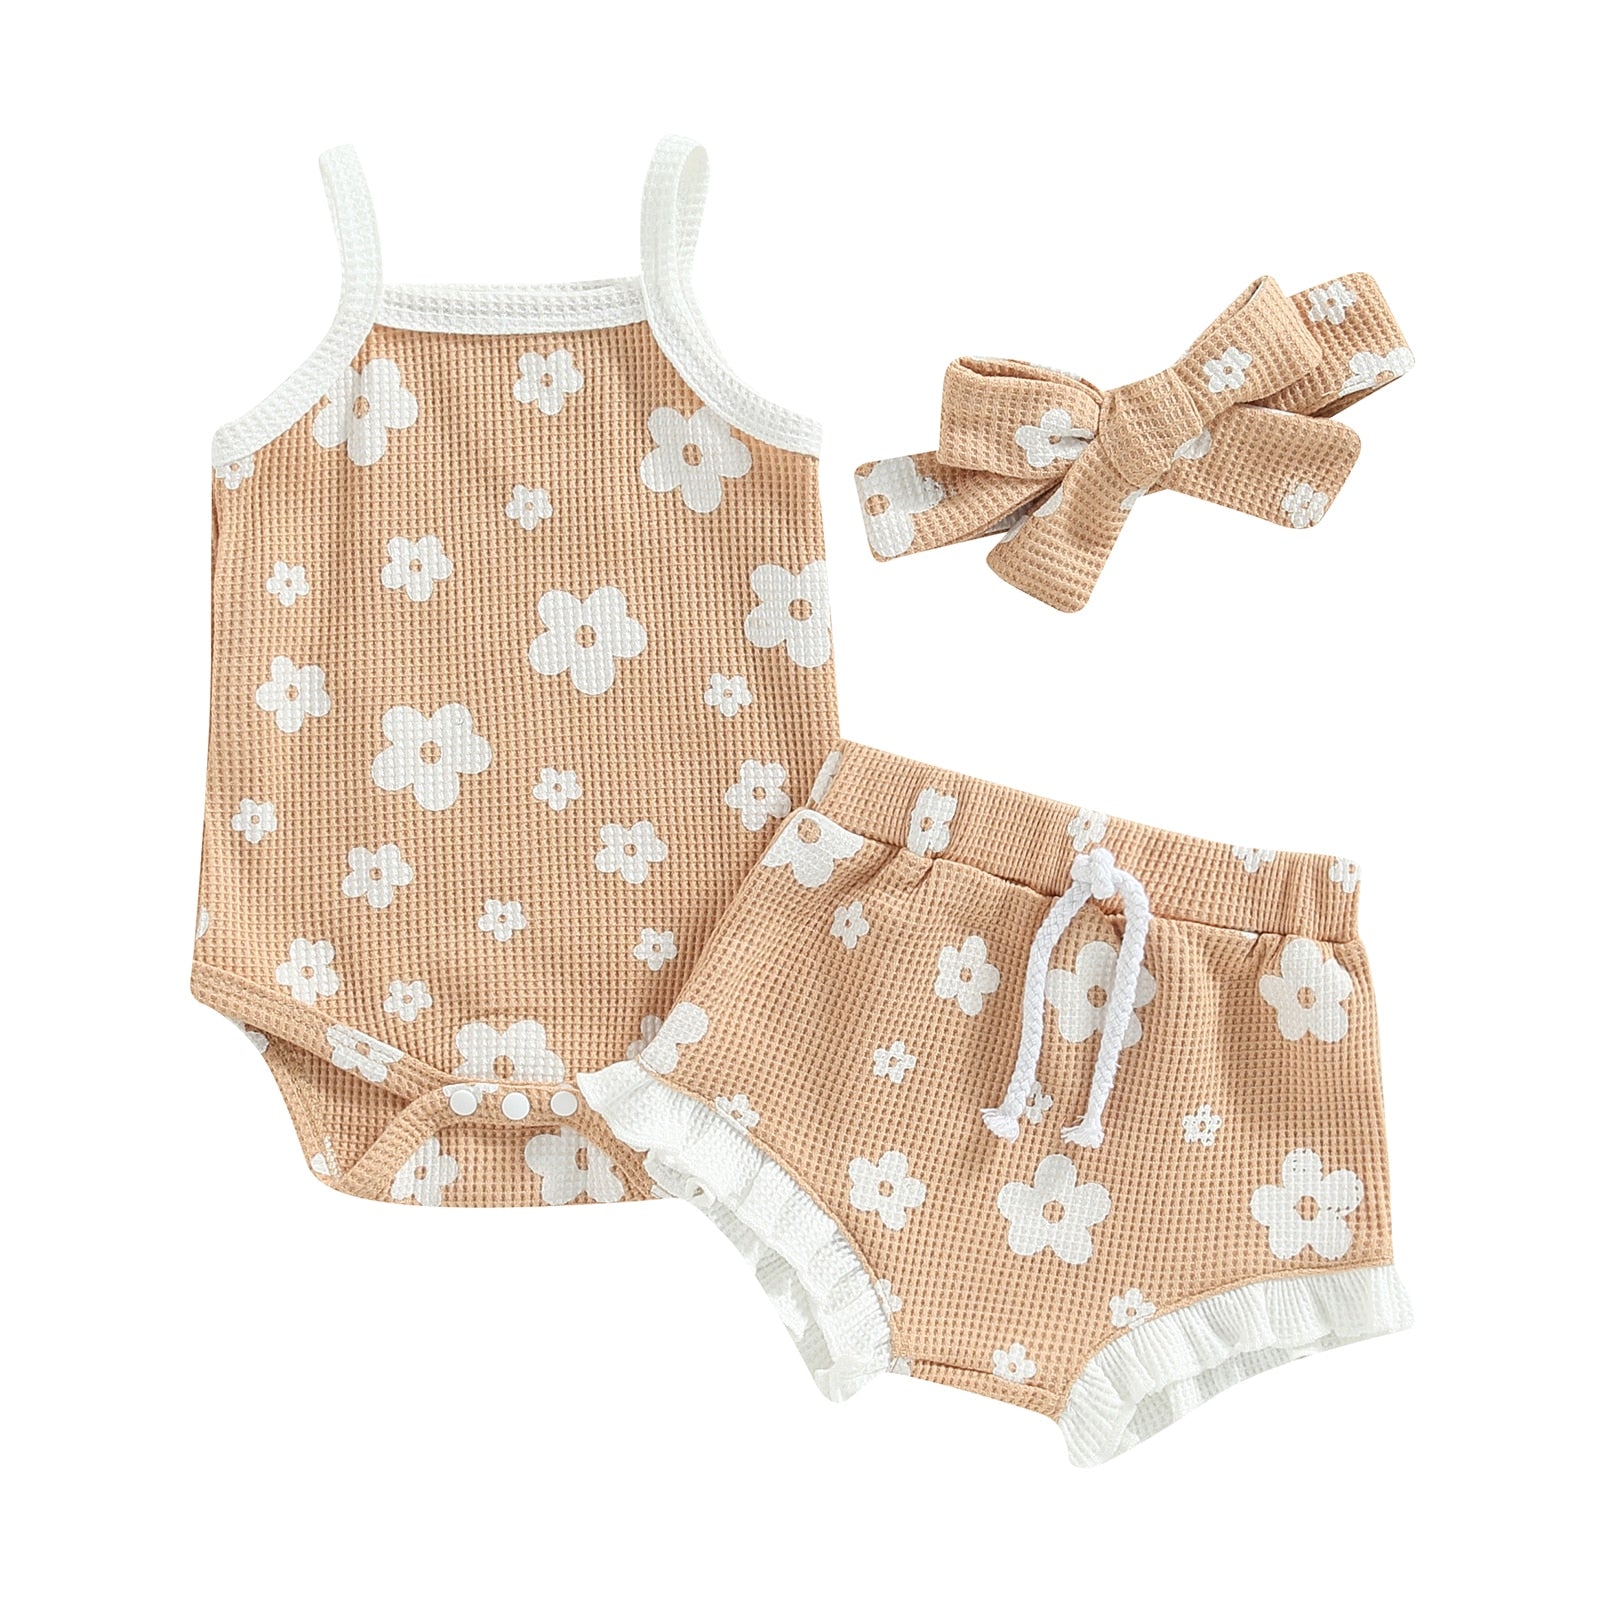 Floral Romper With Matching Topknot Headband